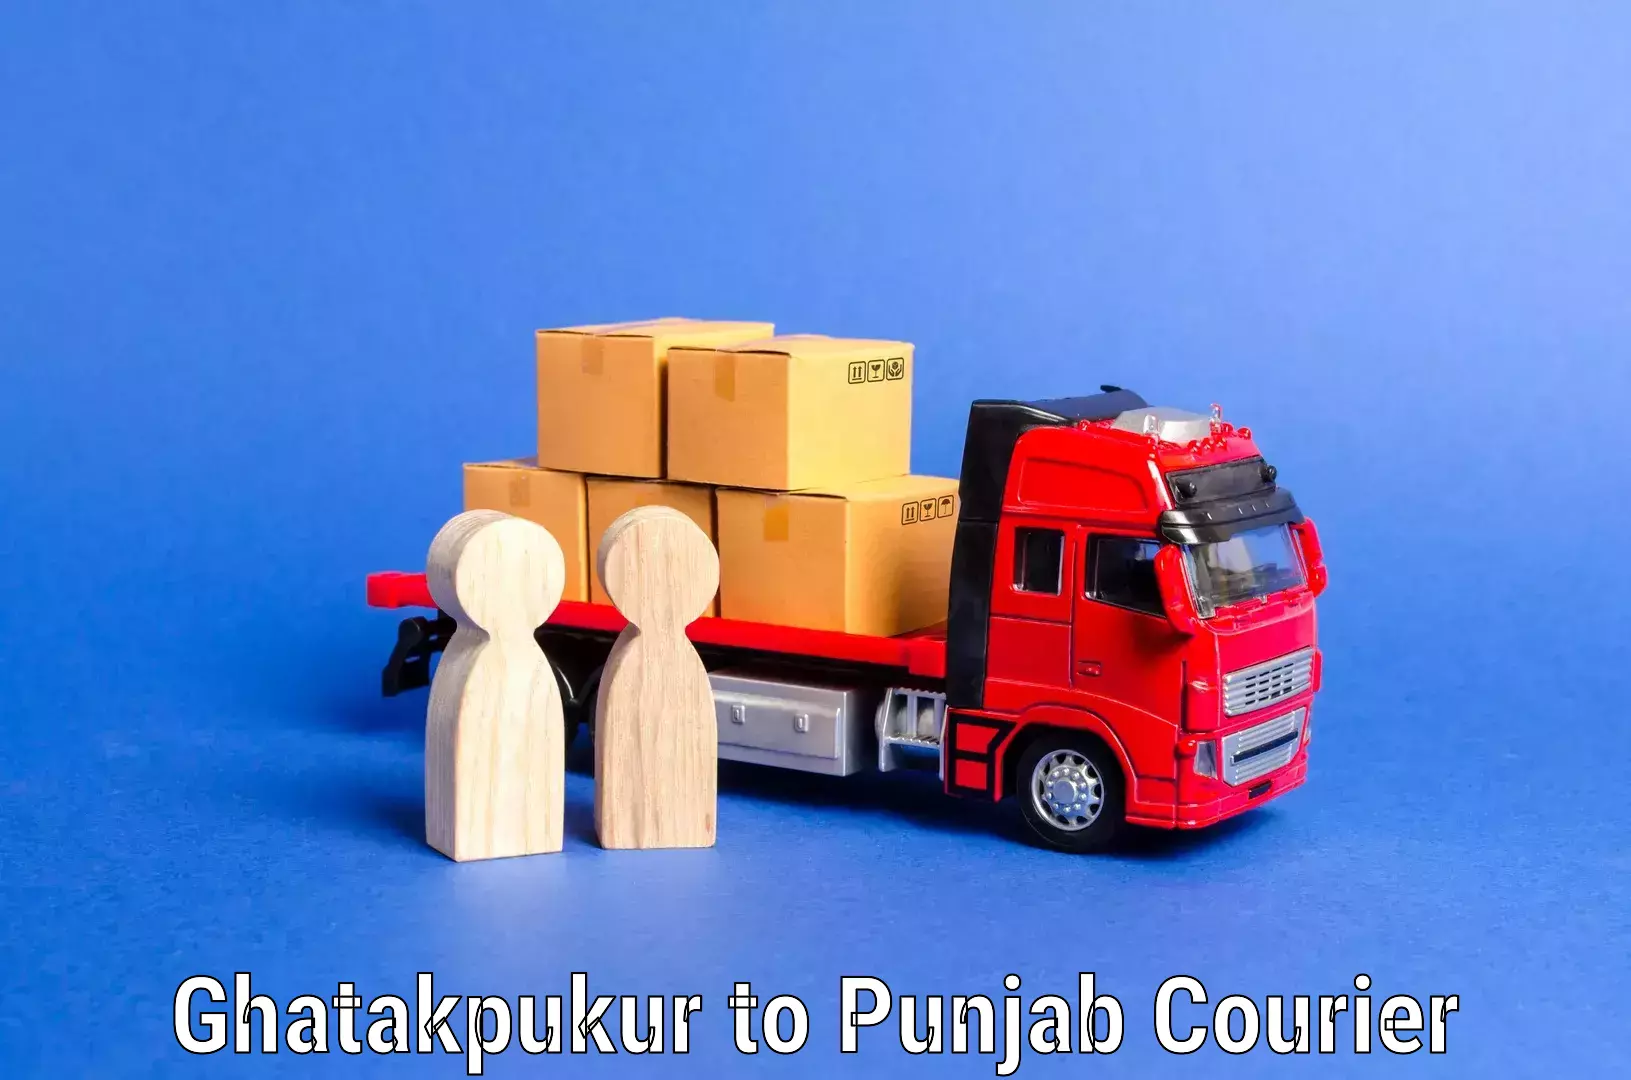 Professional home movers in Ghatakpukur to Punjab